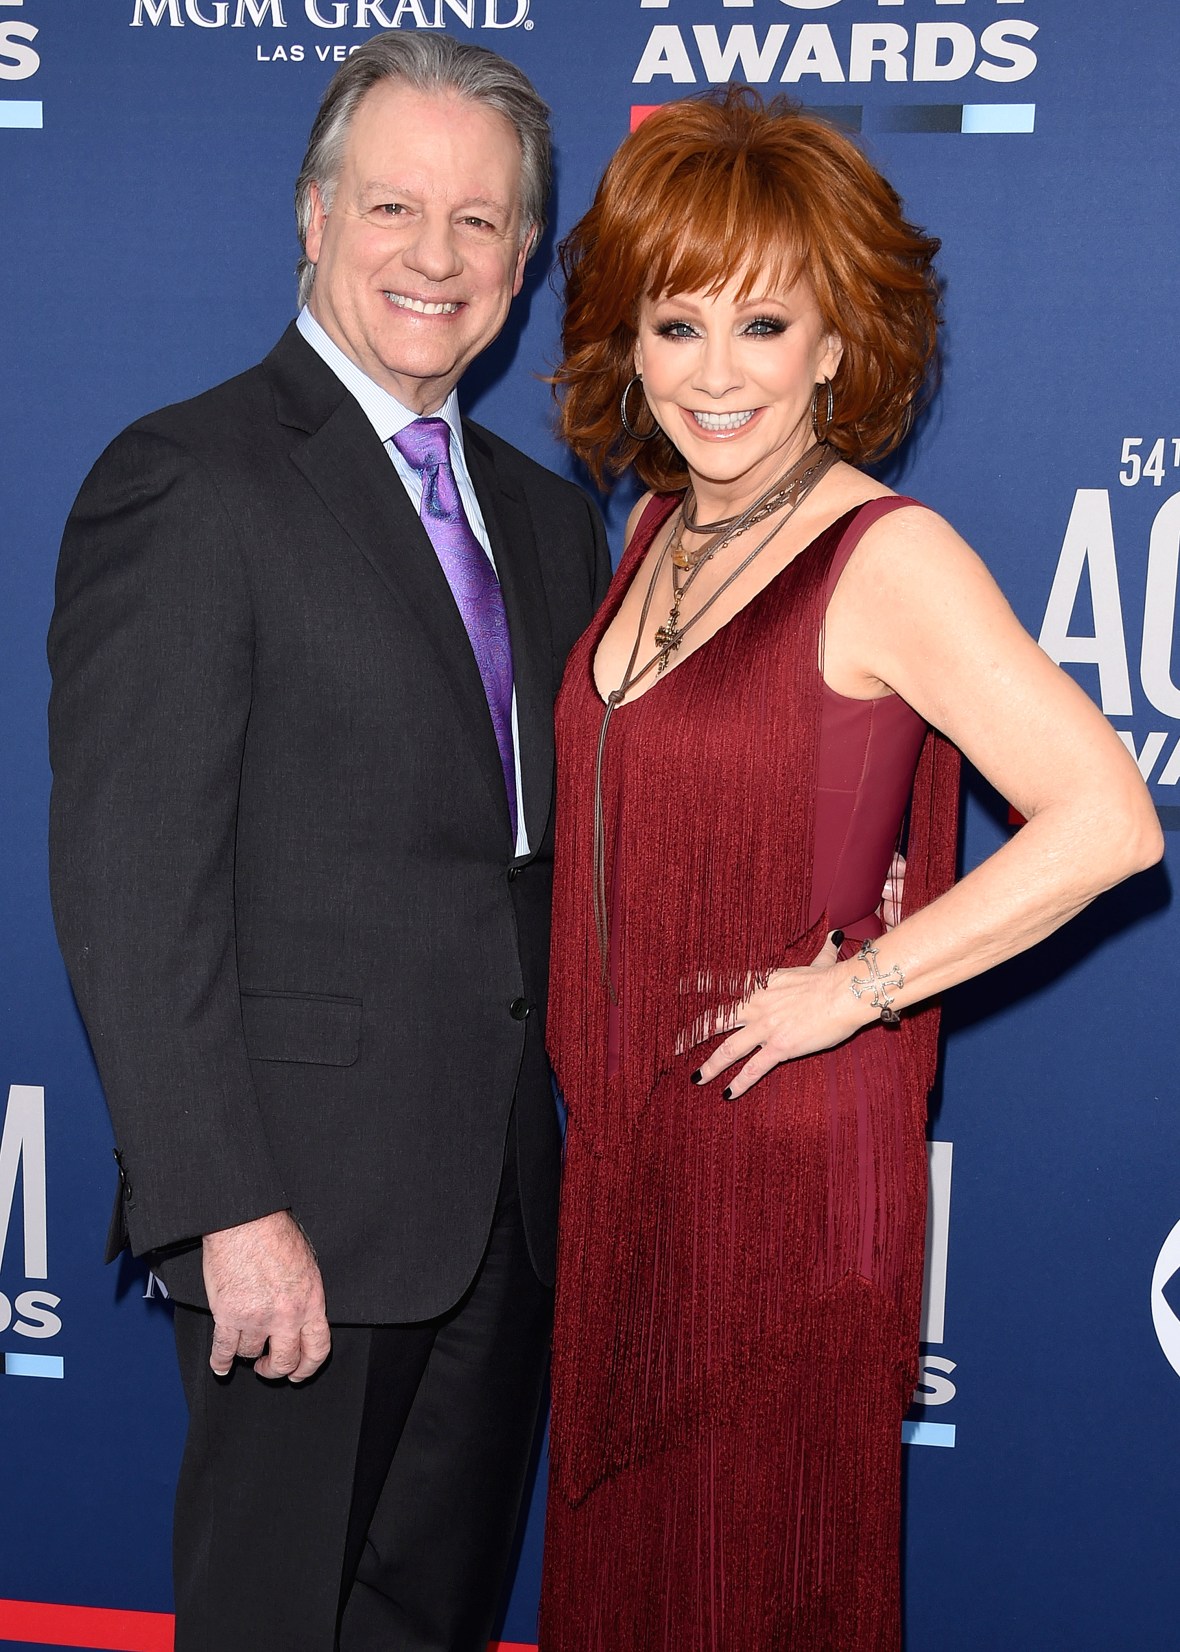 Reba McEntire Is Spending Time With Family After Skeeter Breakup